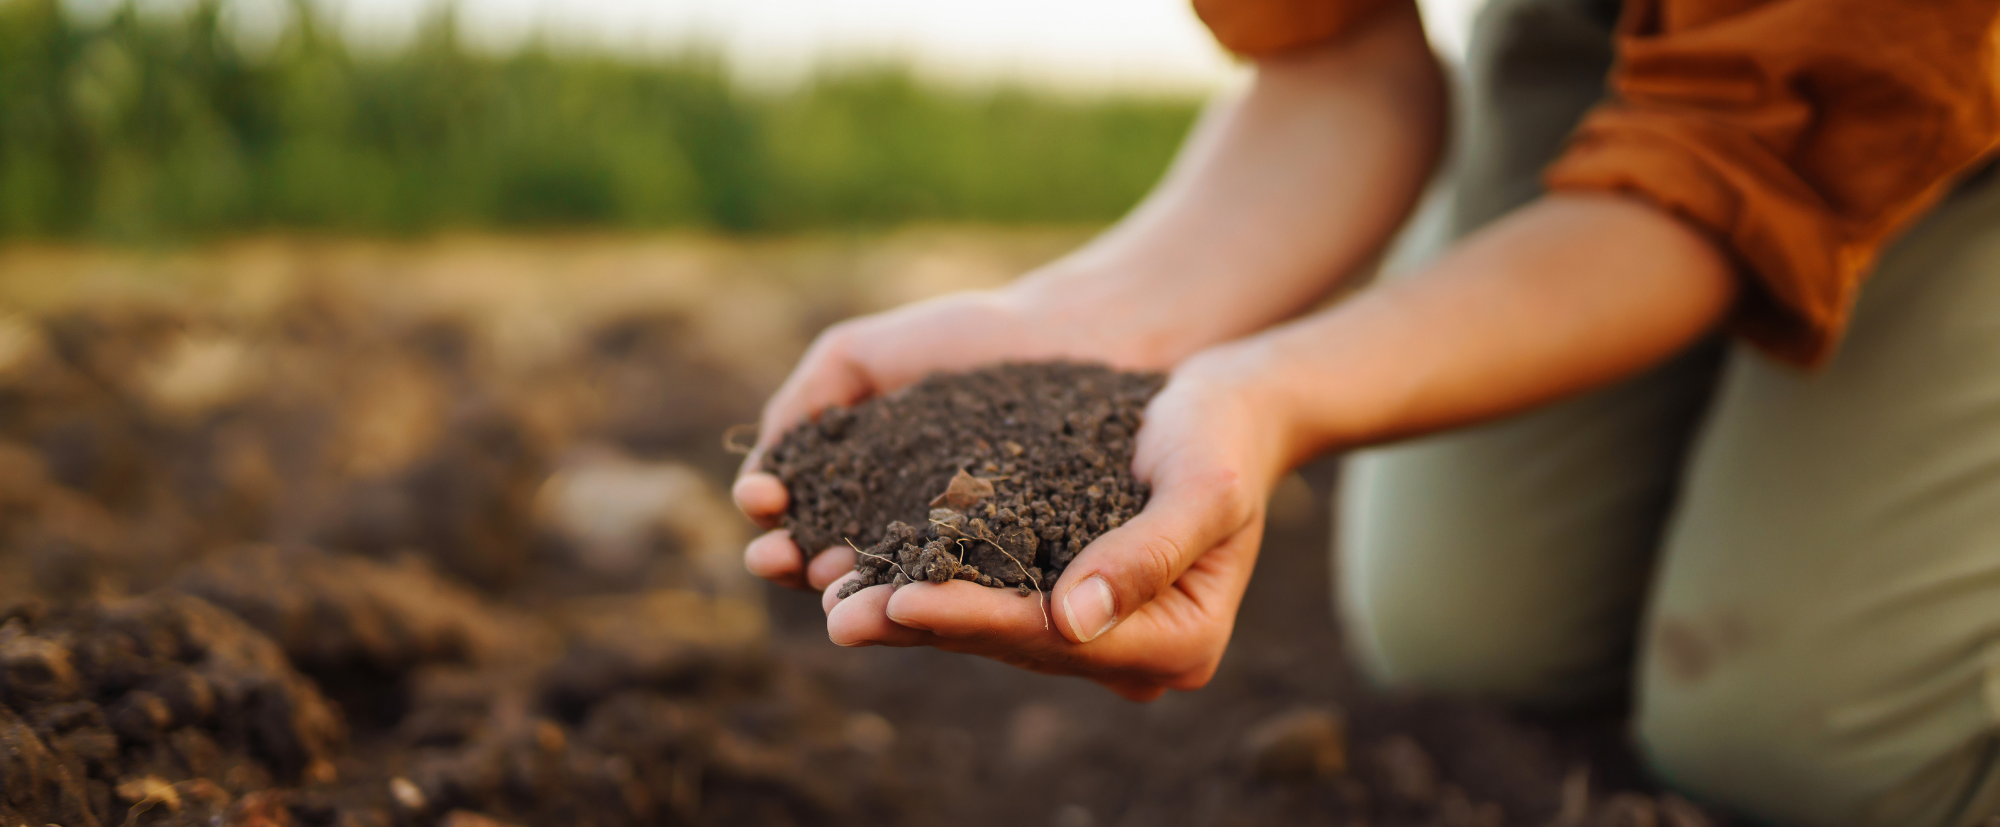 Why to compost, how to compost and the benefits of composting.